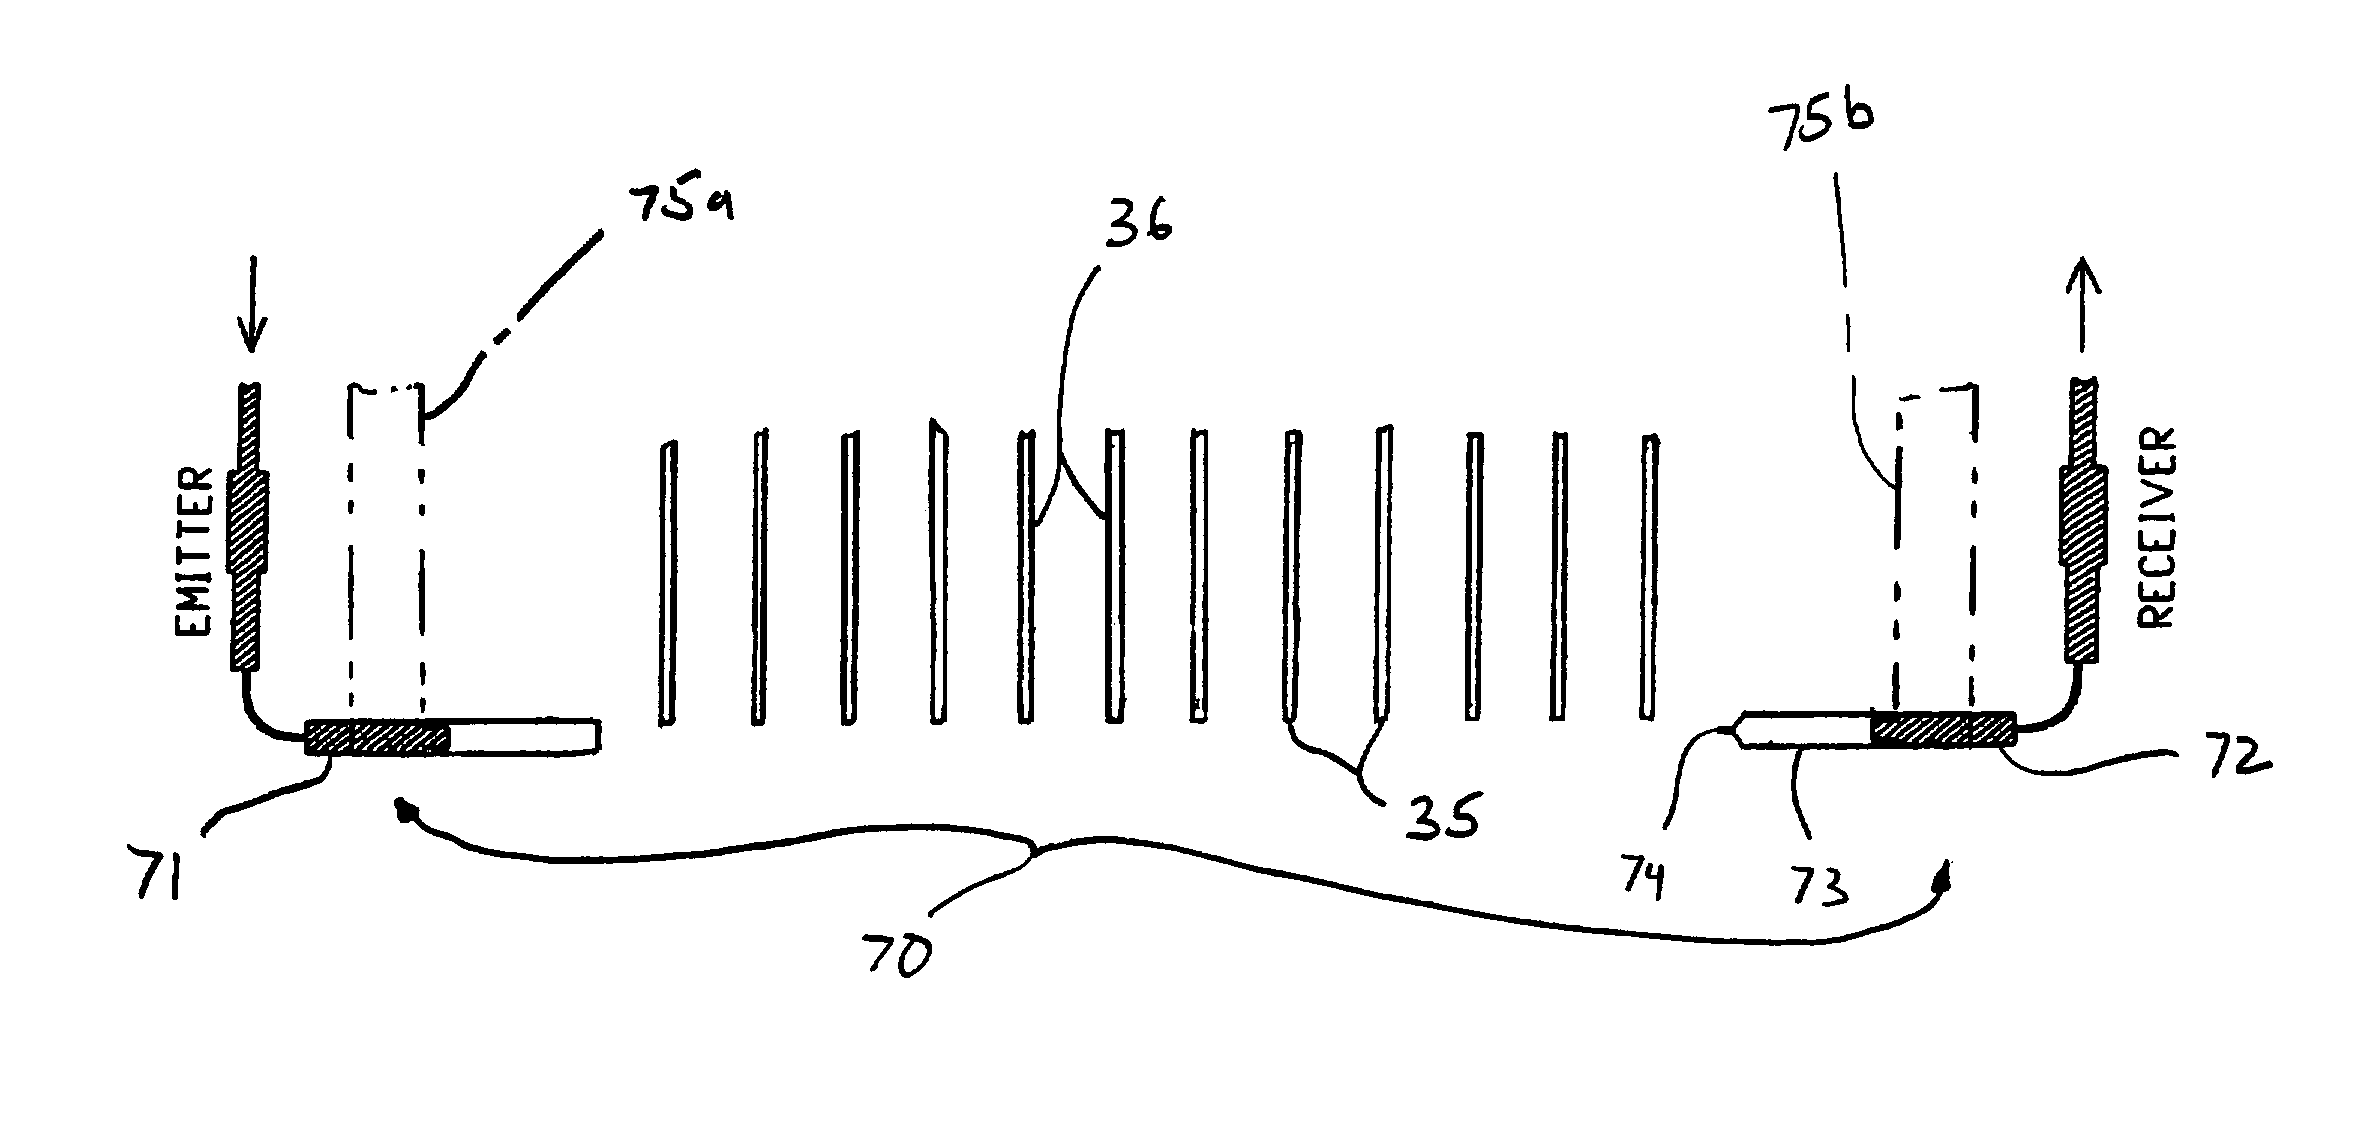 Apparatus and method for assessing the liquid flow performances through a small dispensing orifice